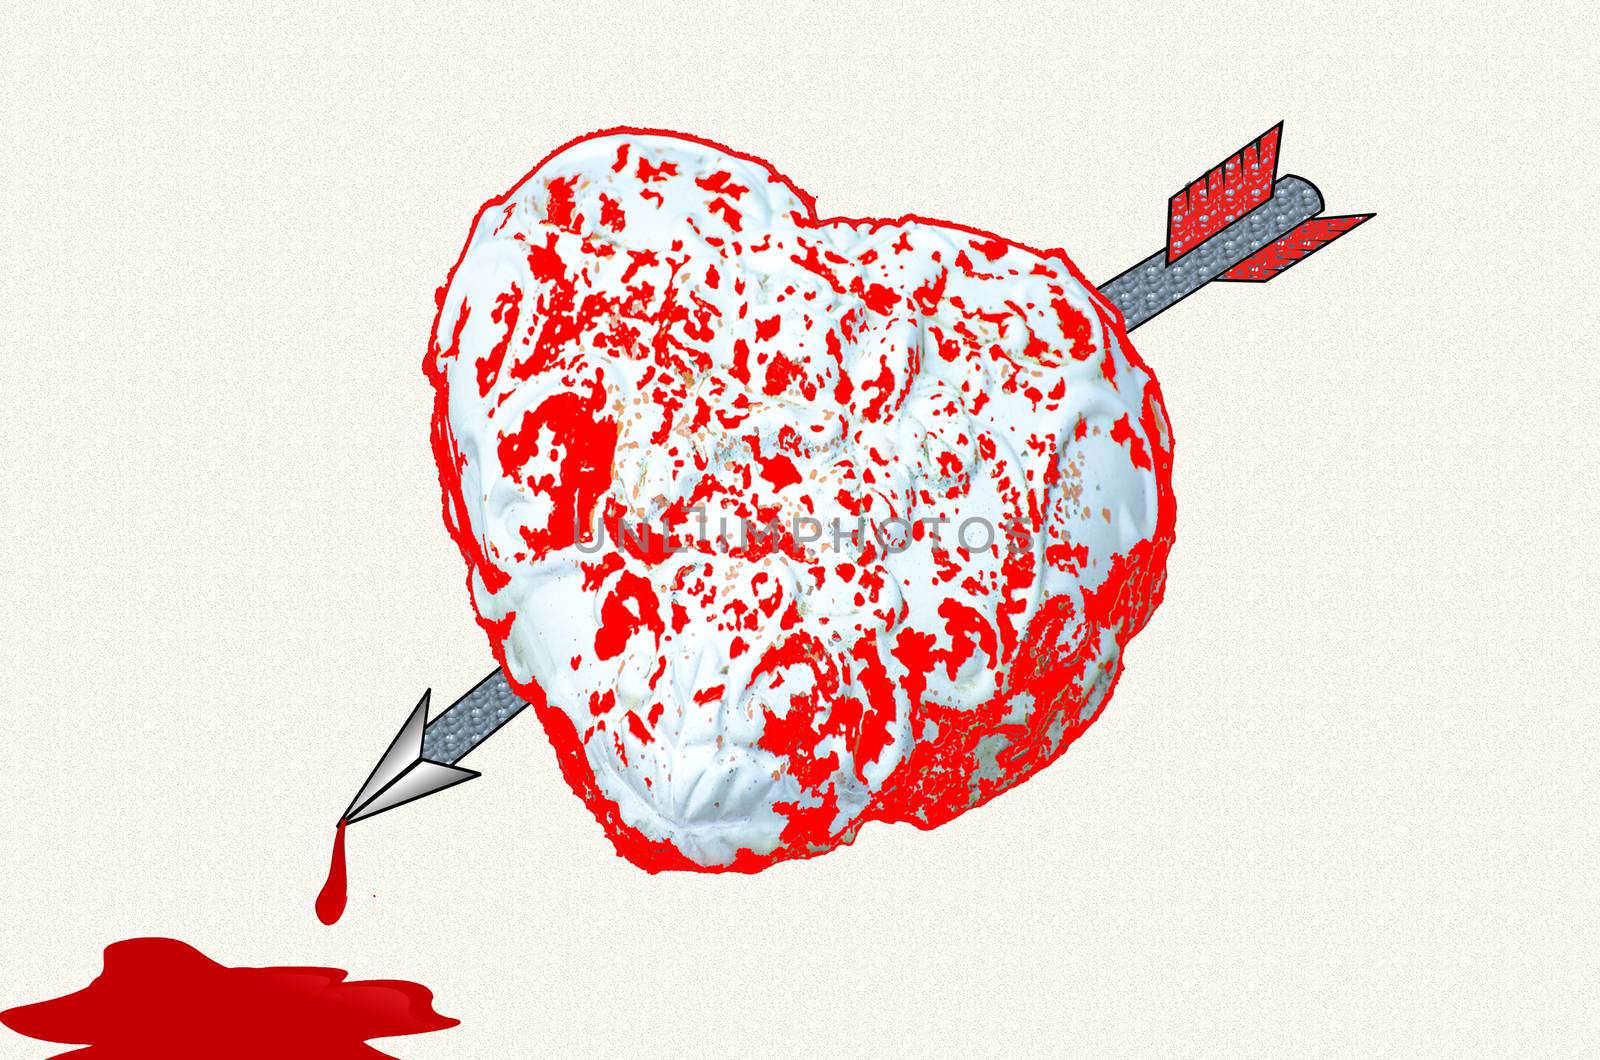 Red and white heart with an arrow pierced with a pool of blood on light textured background.
